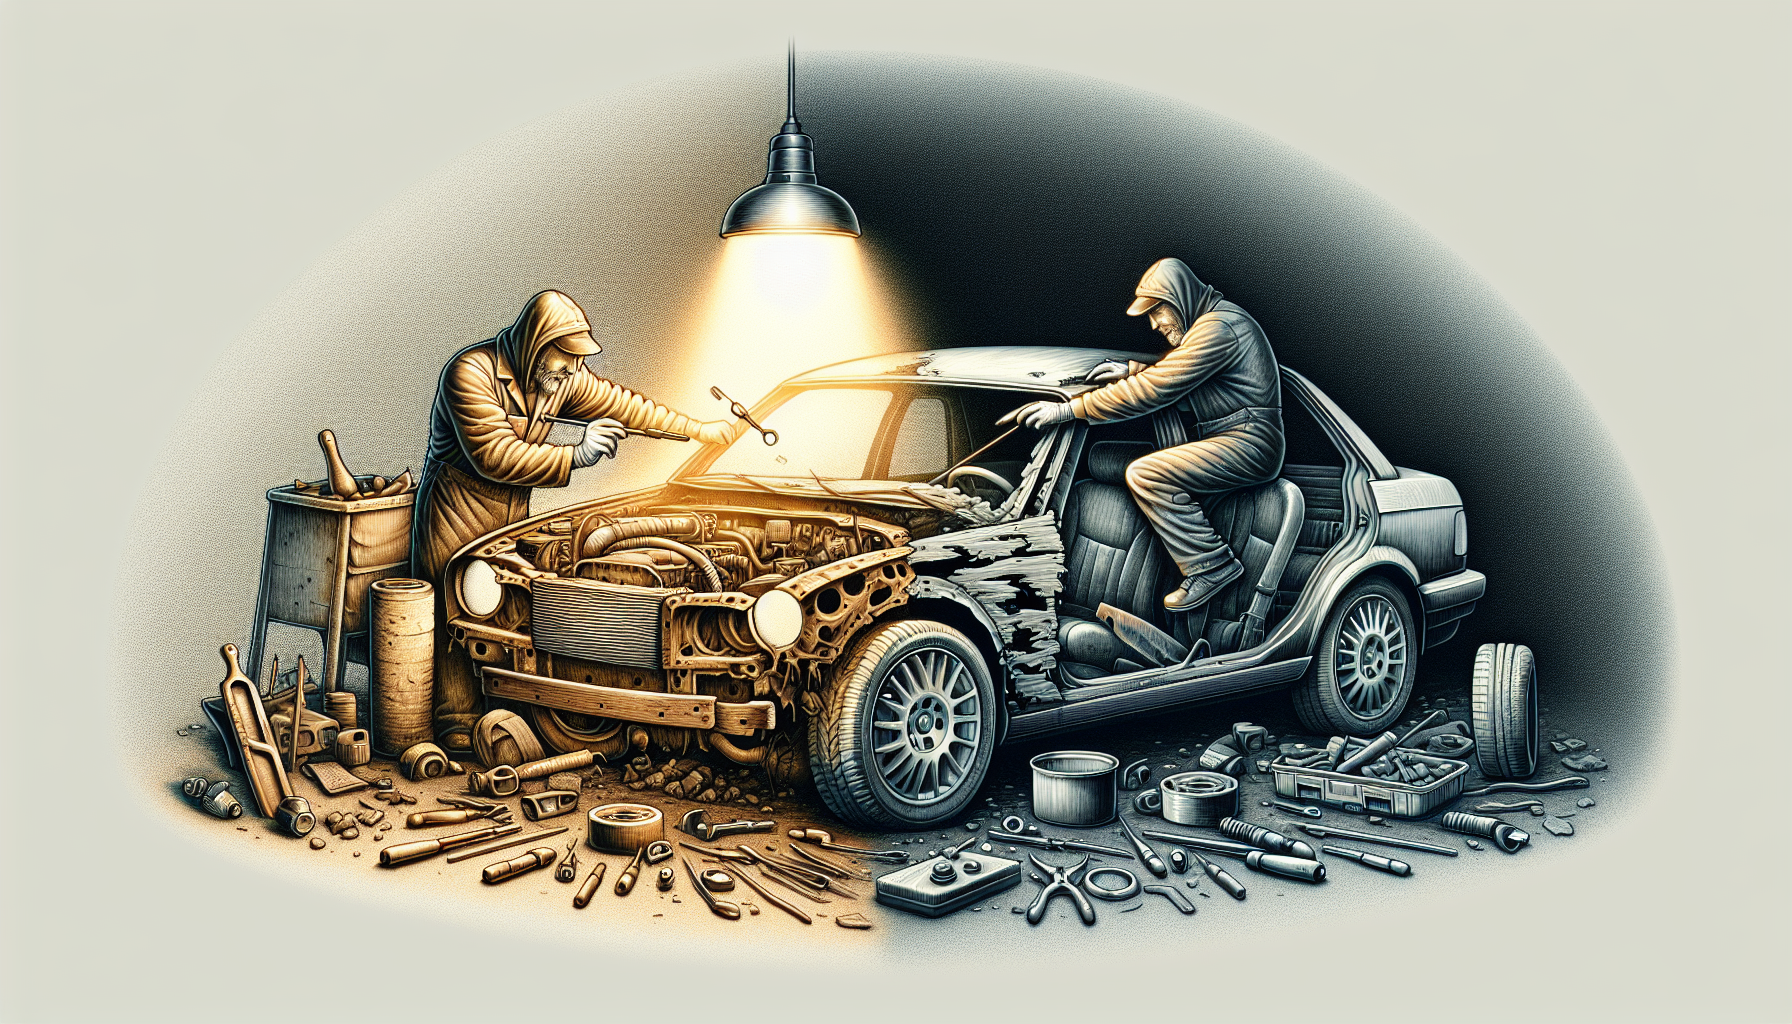 Illustration of a mechanic repairing minor damages on a junk car